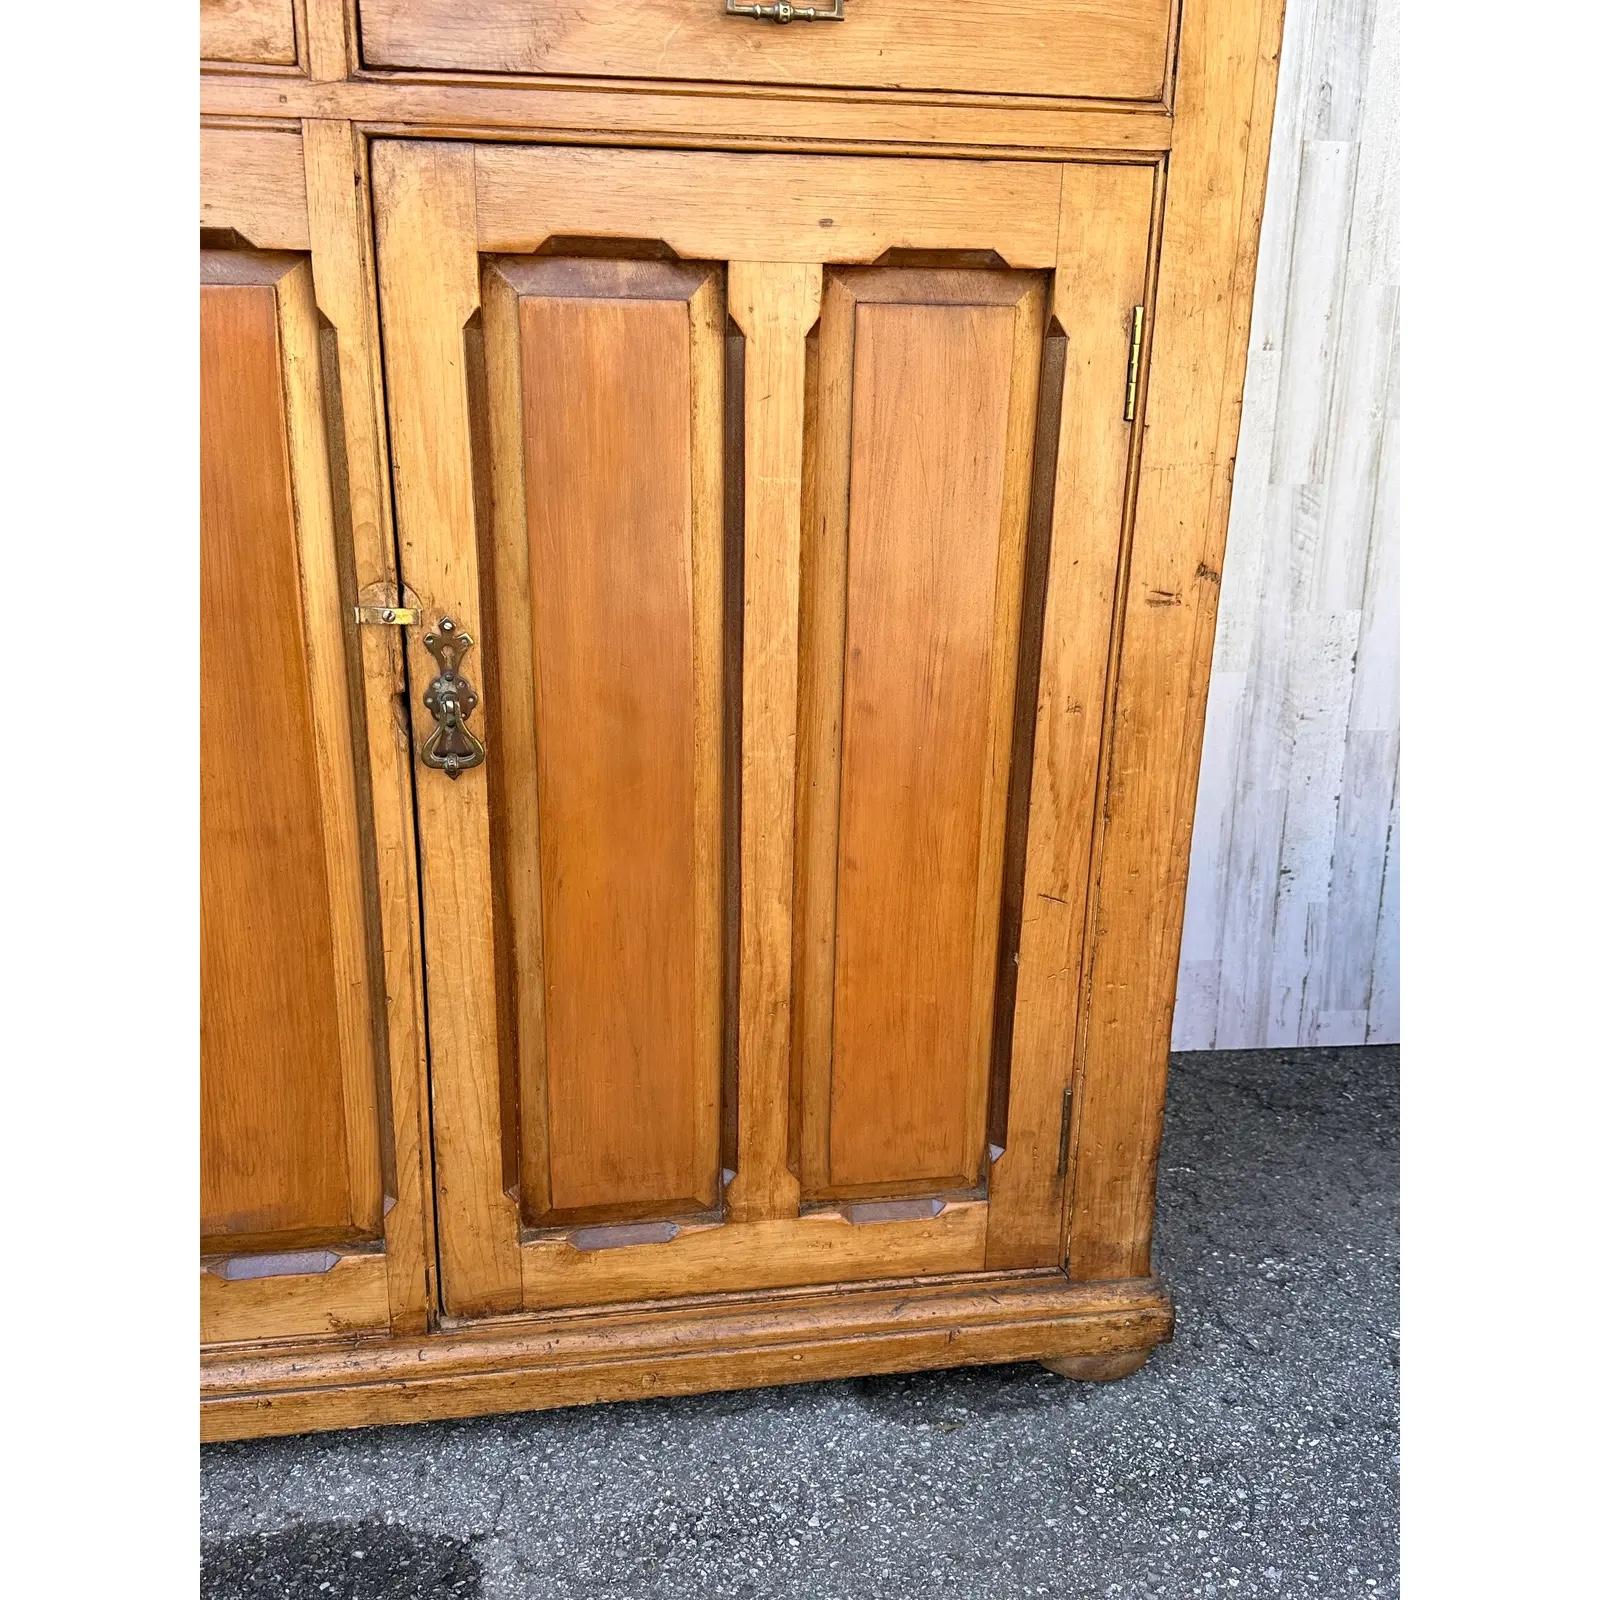 This is a fantastic early 19th century Scottish pine cupboard all original condition two doors on the bottom opening into ample storage three drawers on the top with a small accent drawer in the center. With such amazing patina and incredible design